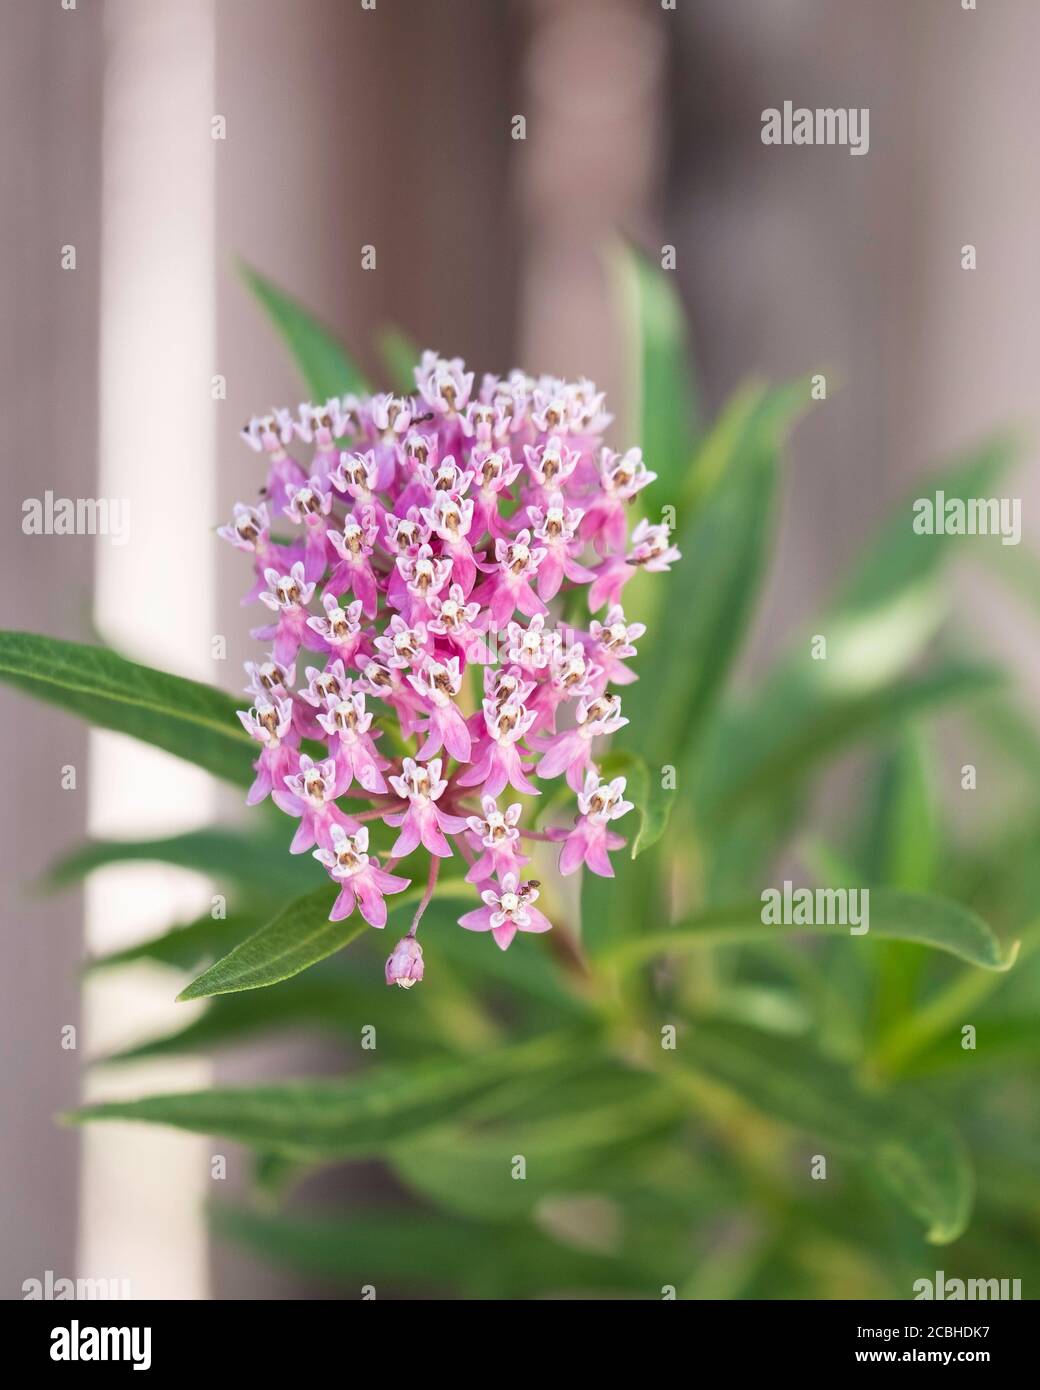 Swamp milkweed or butterfly weed, ‘Cinderella', a Monarch butterfly plant food in the USA. Stock Photo